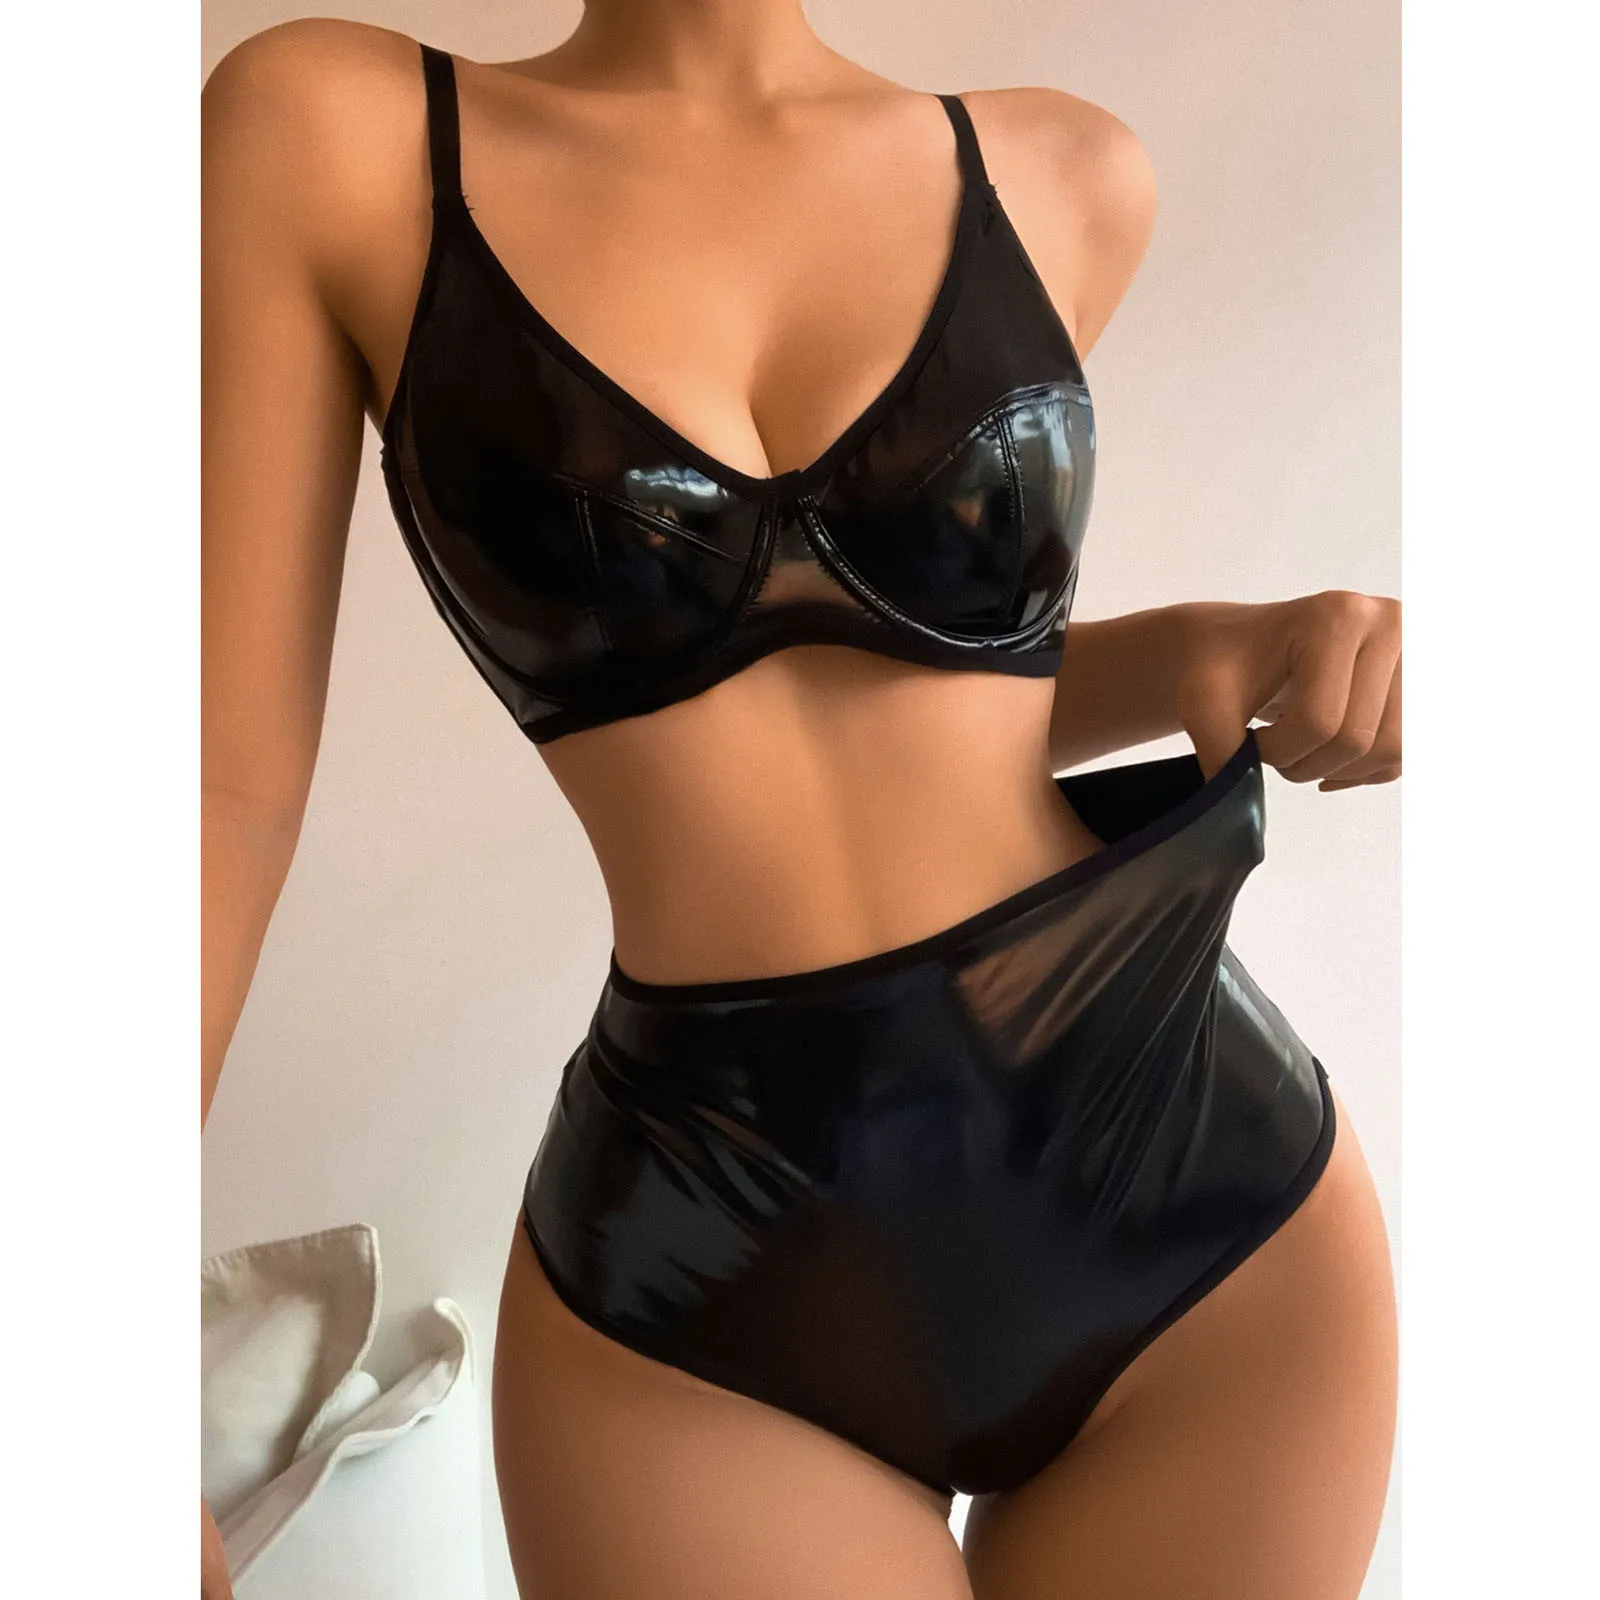 Sexy Women Latex Lingerie Two-piece Pu Leather Women Steel Ring Push Up Bra For Ladies Sexy Lingerie High Waist Underwear Set bra and brief sets